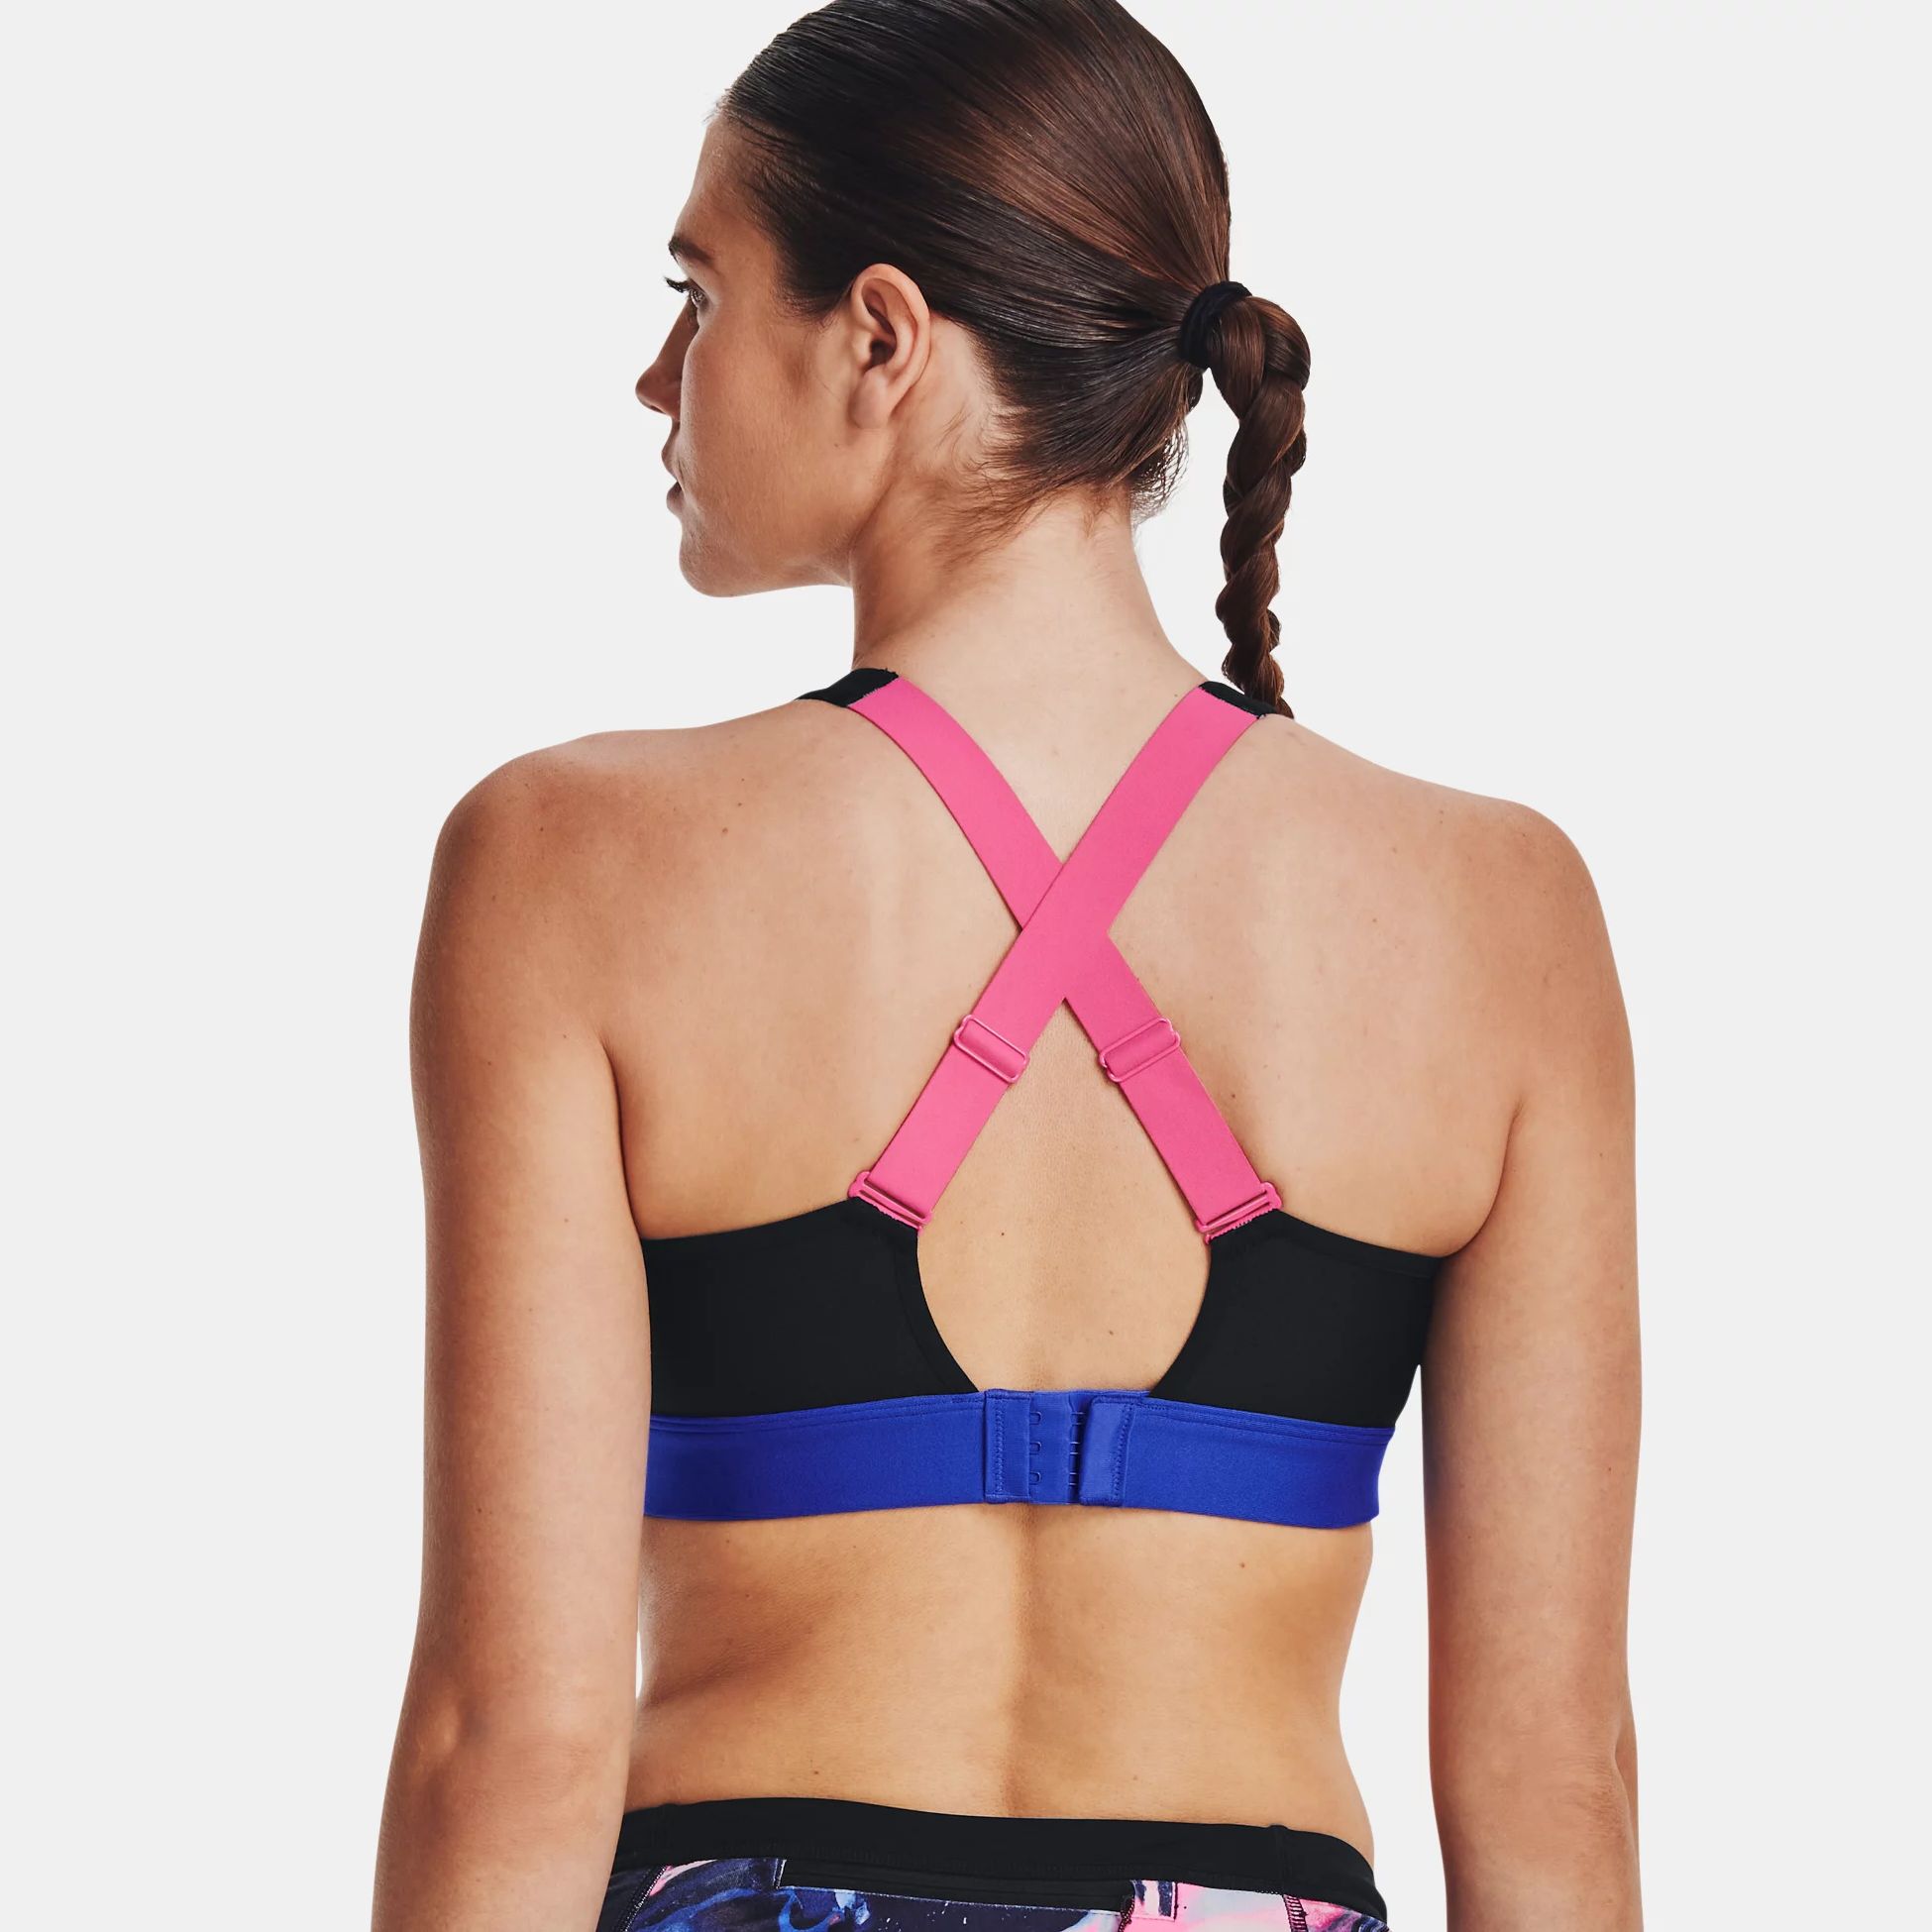 https://img1.sportconcept.com/backend_nou/content/images/fitness-under-armour%20ua-infinity-high-harness-sports-bra-20220909124701.jpg